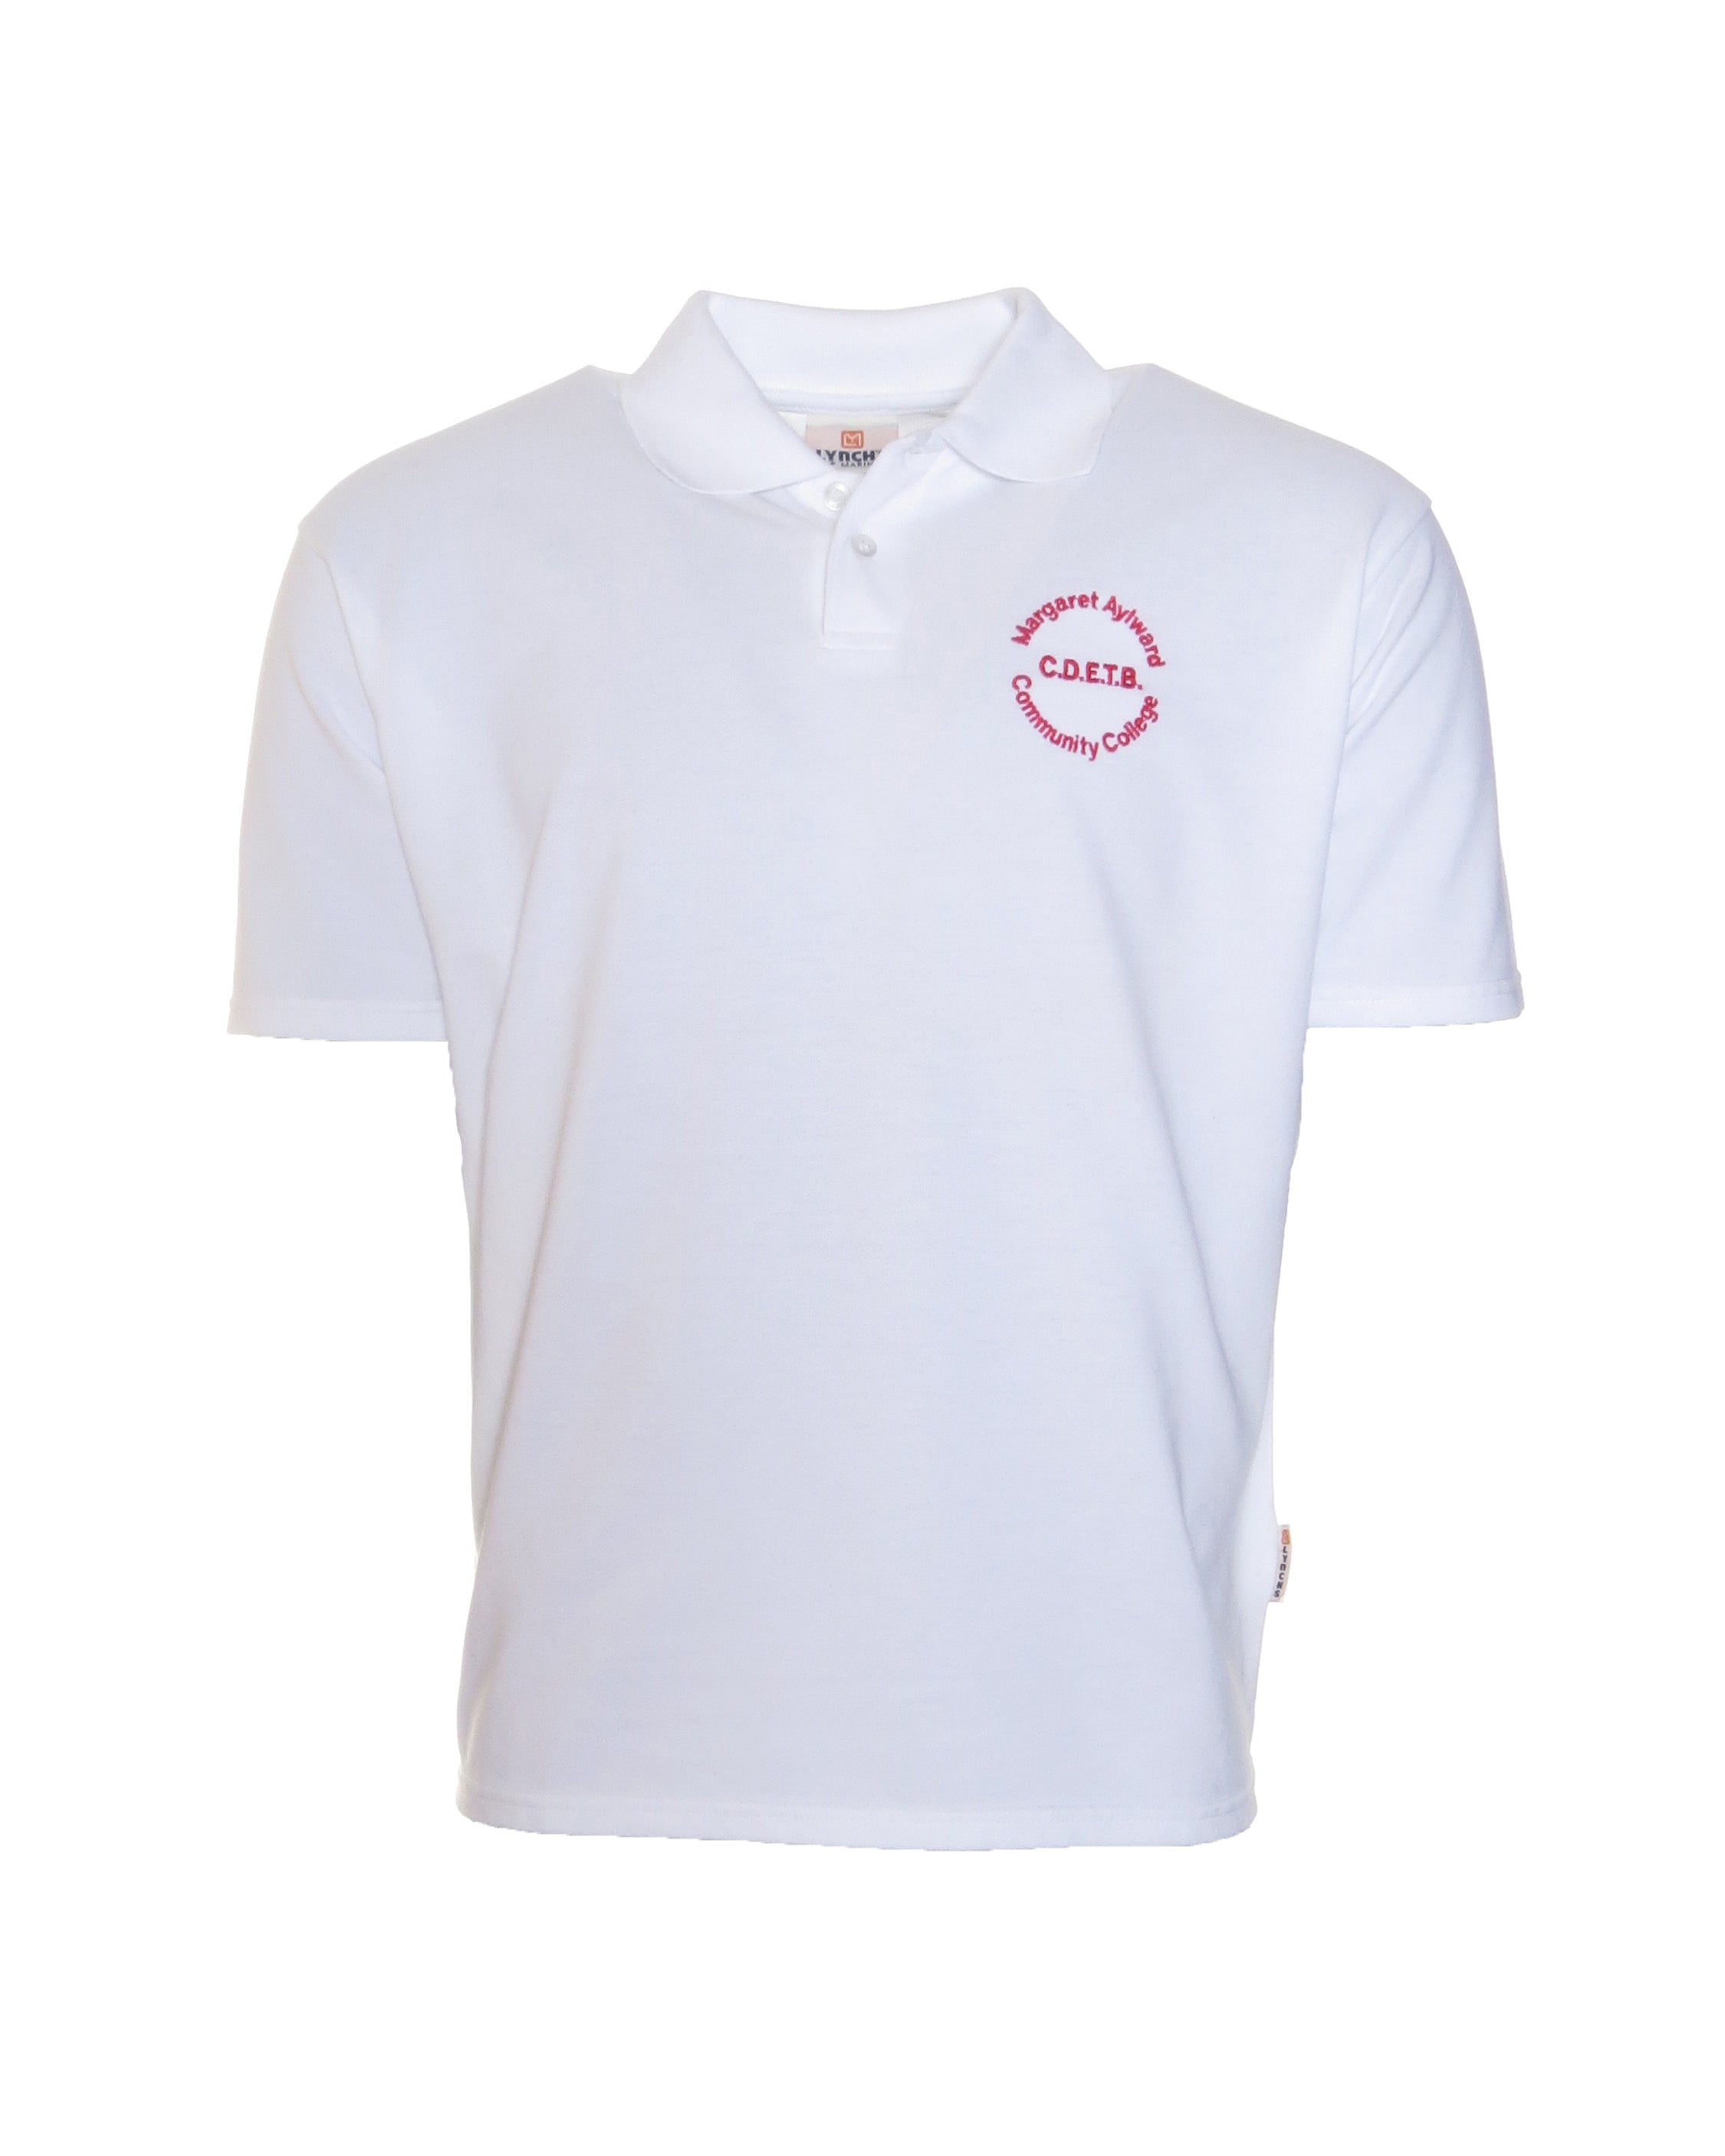 Ellenfield Community College Crested poloshirt